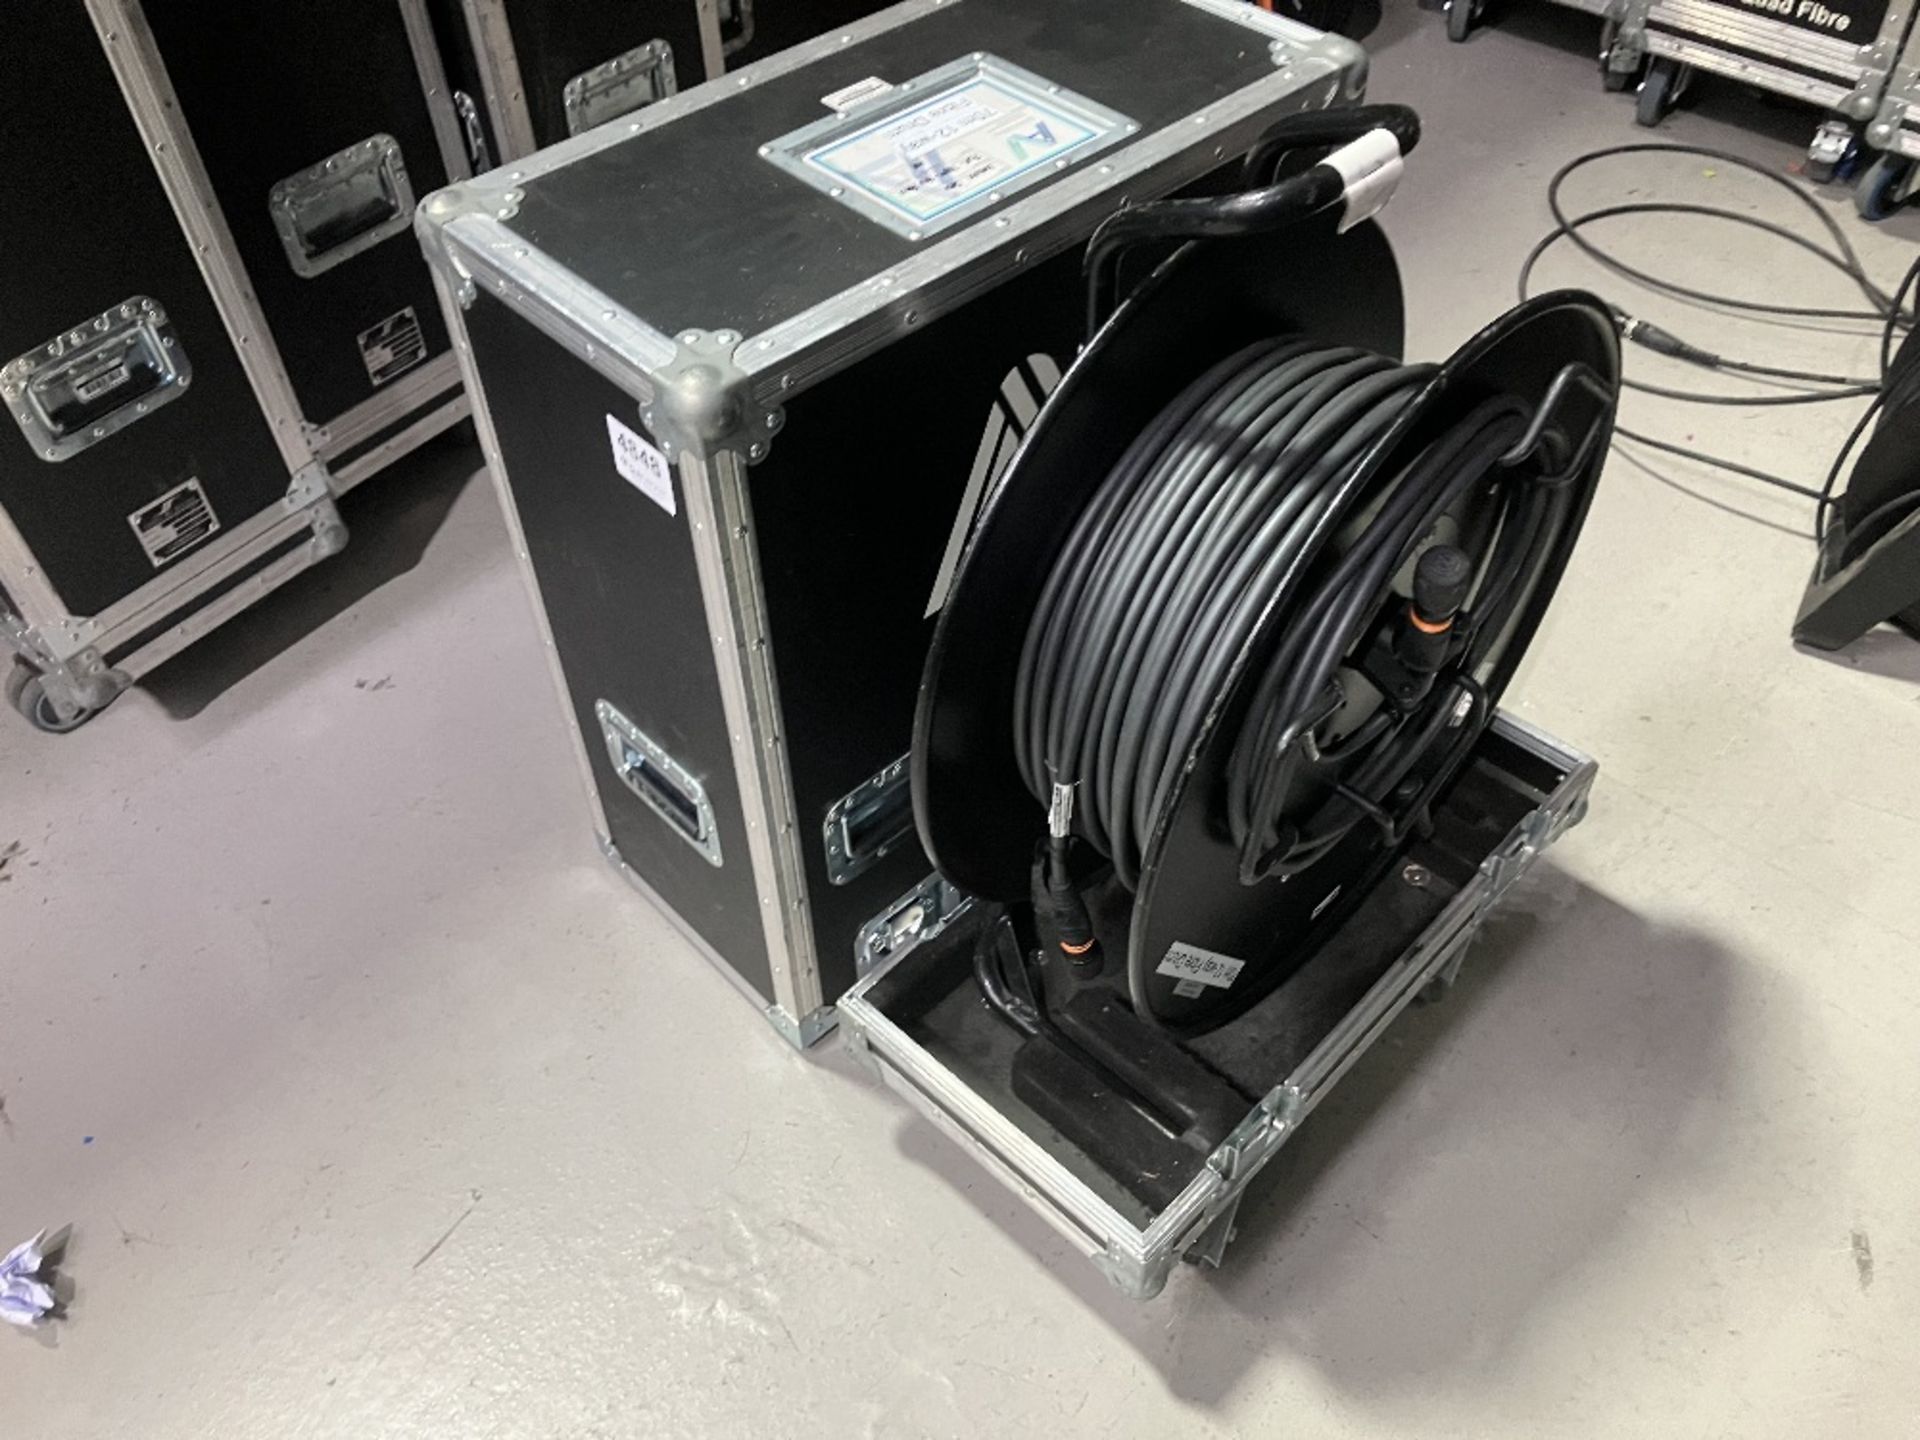 70m 12-way Fibre Cable Reel With Heavy Duty Mobile Flight Case - Image 3 of 7